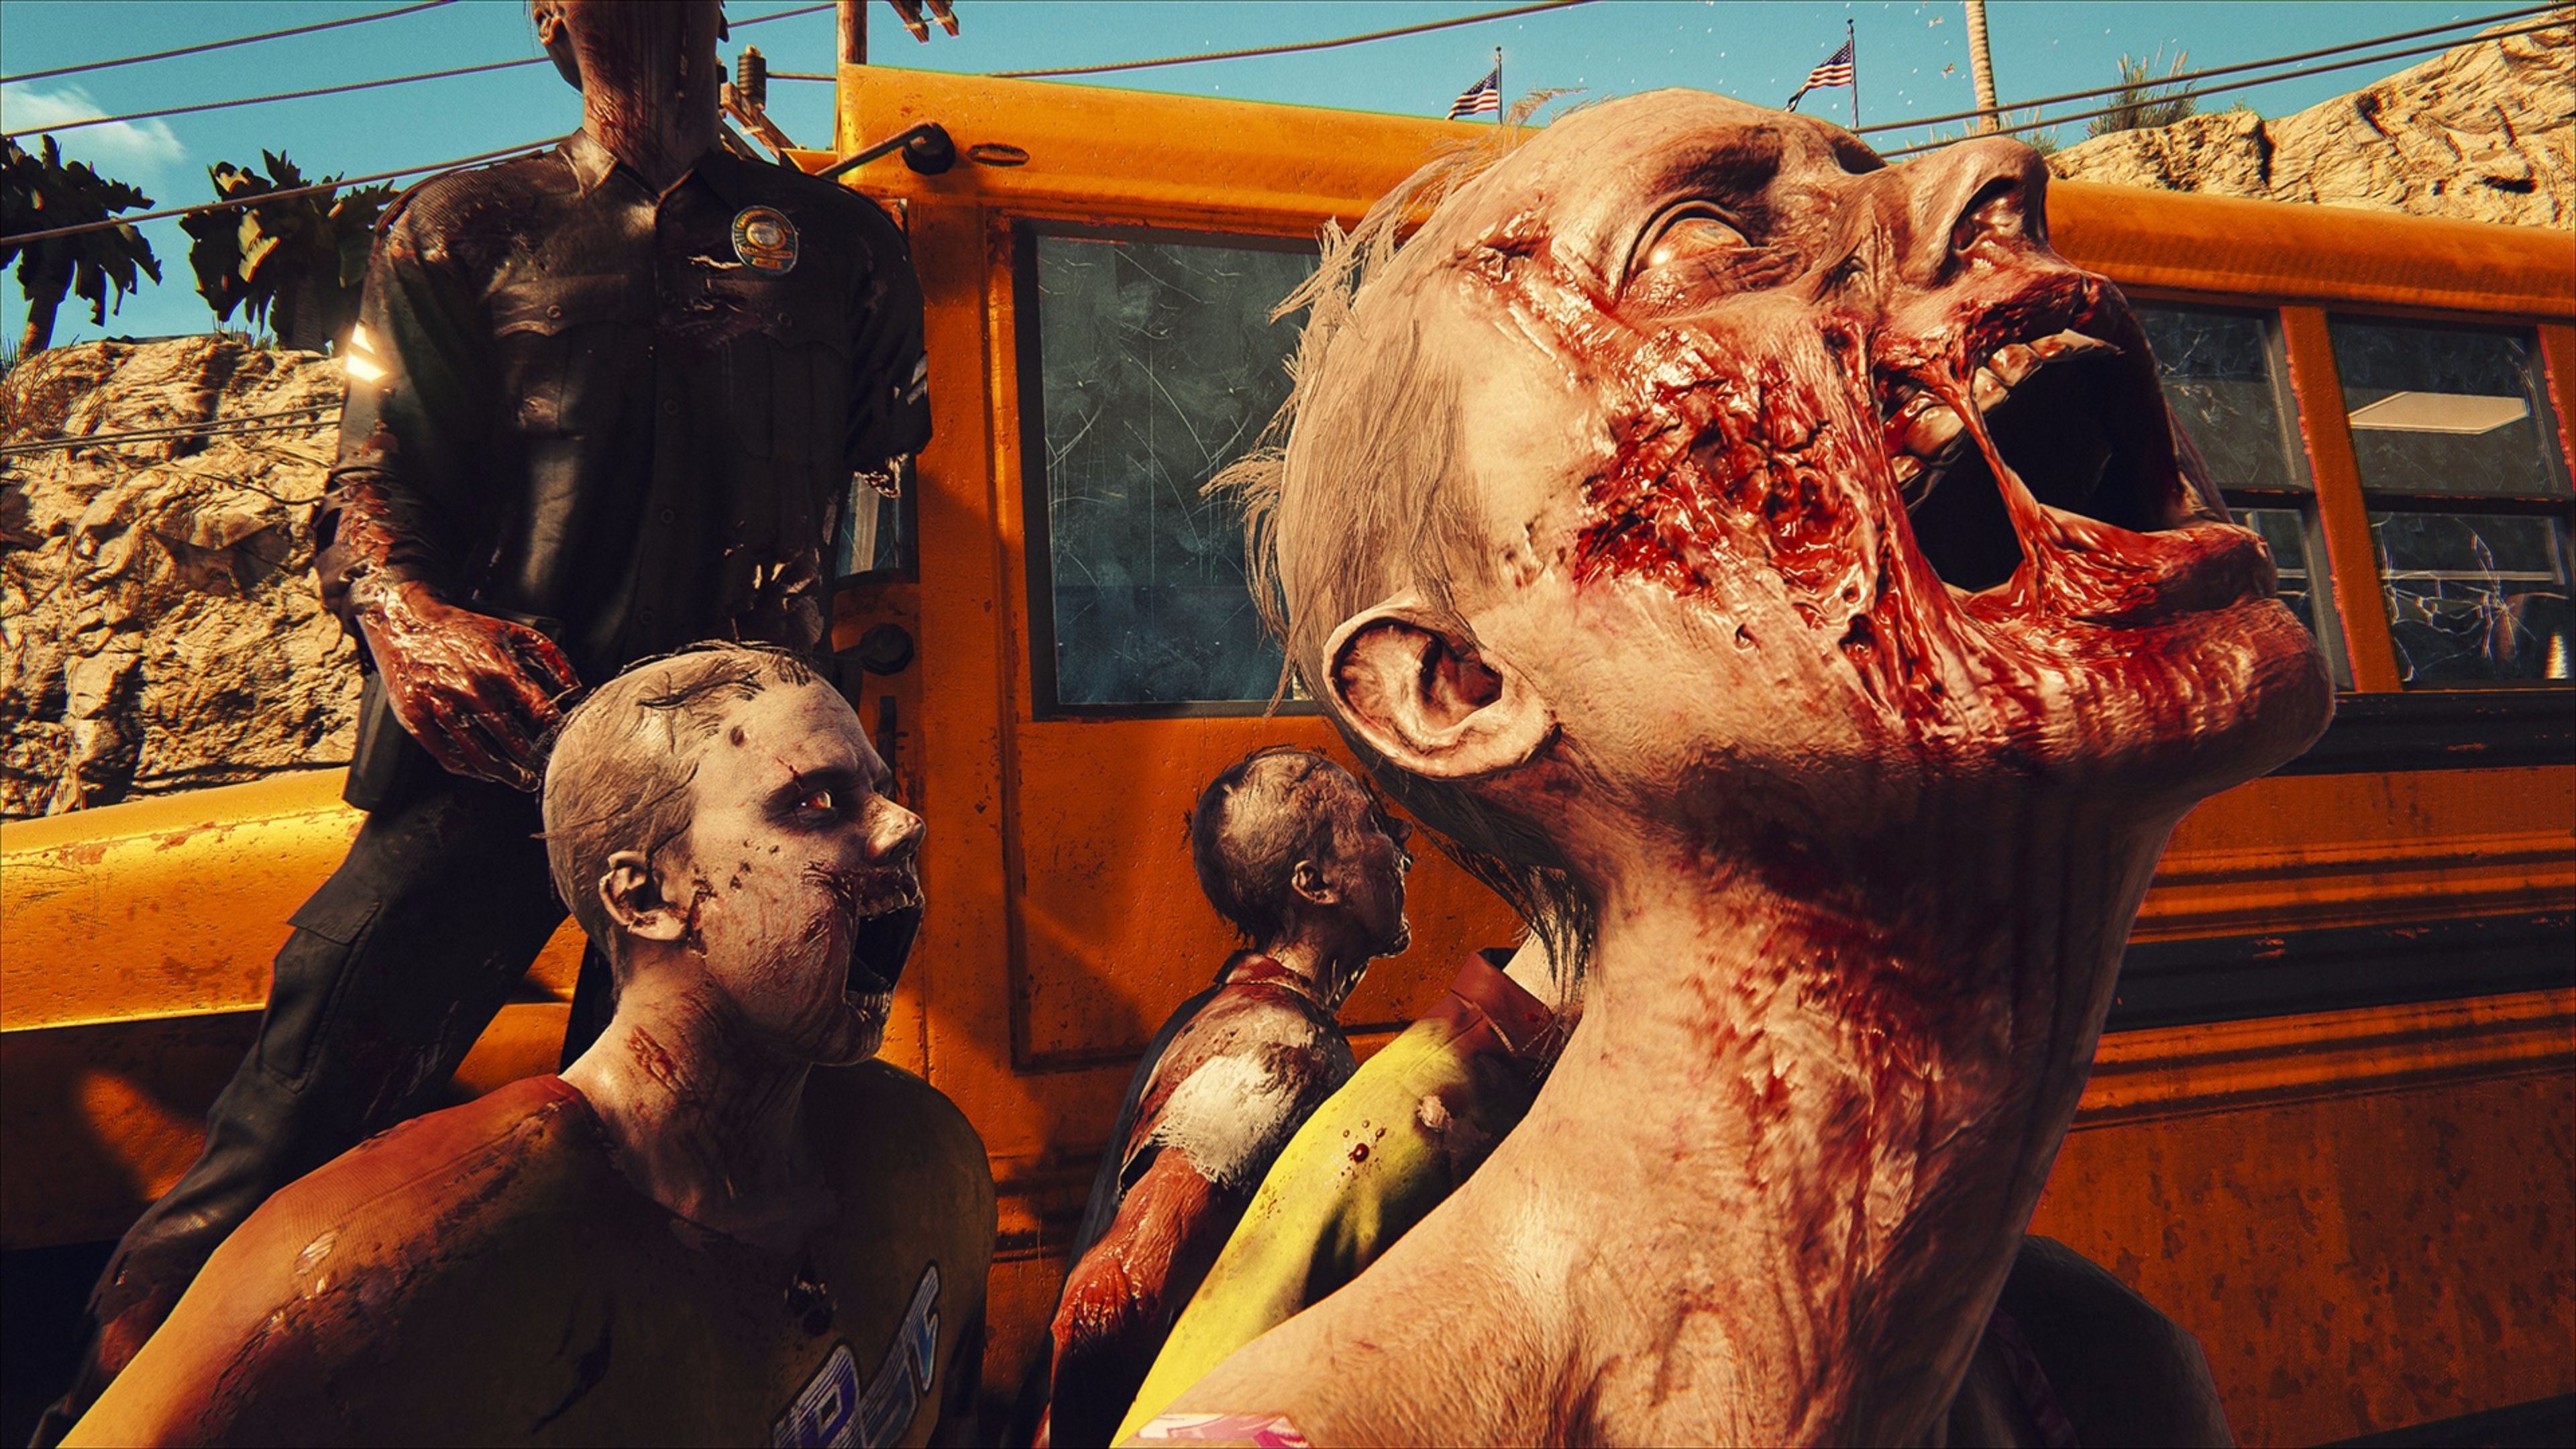 will dead island 2 ever be released